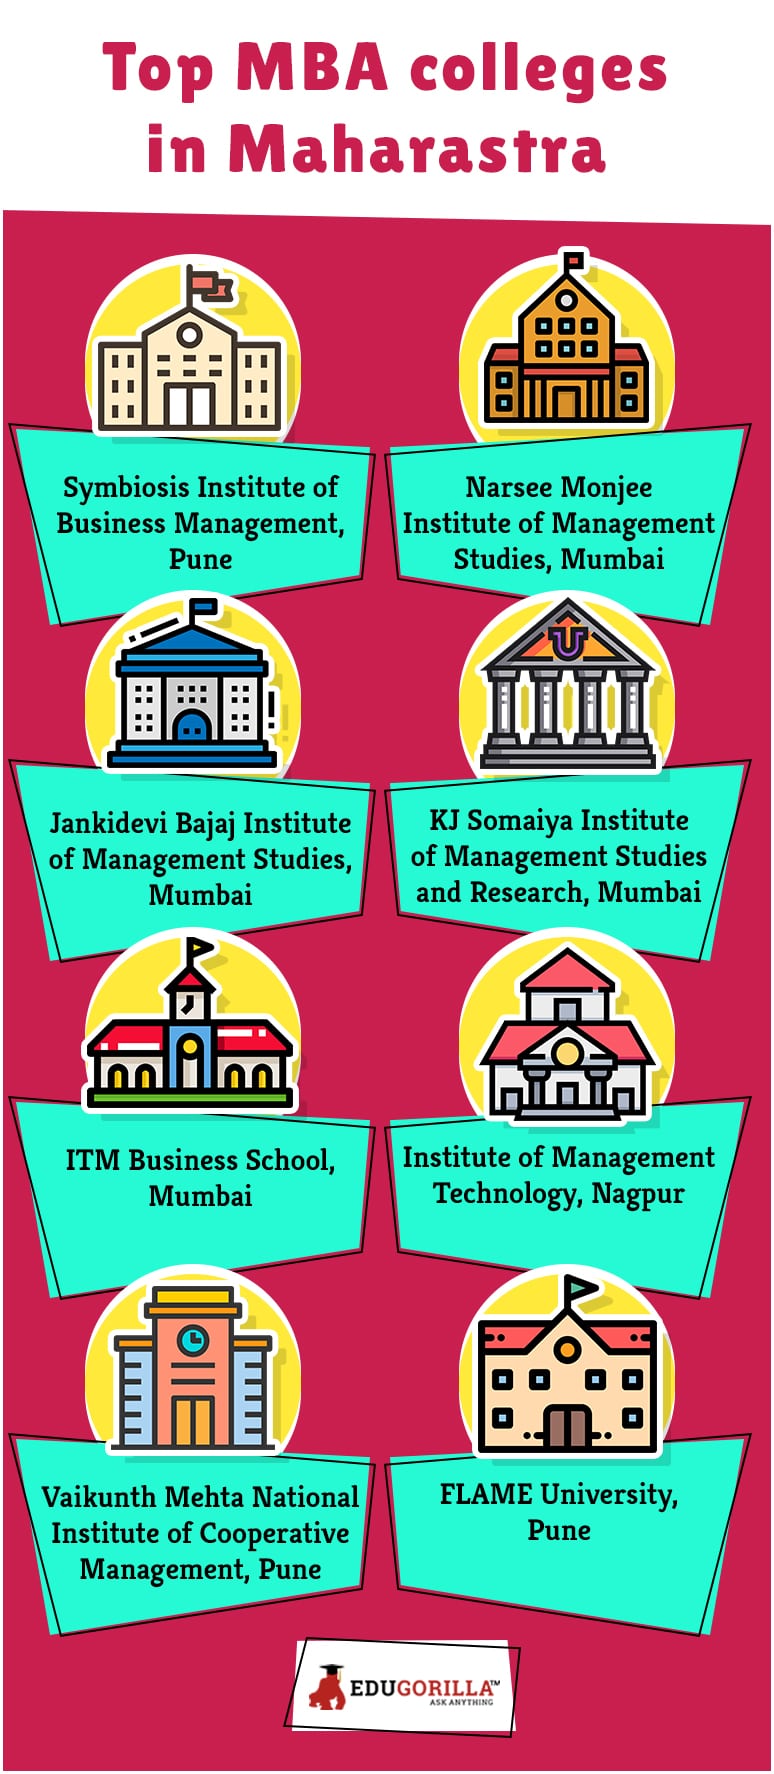 Top MBA colleges in Mahrastra